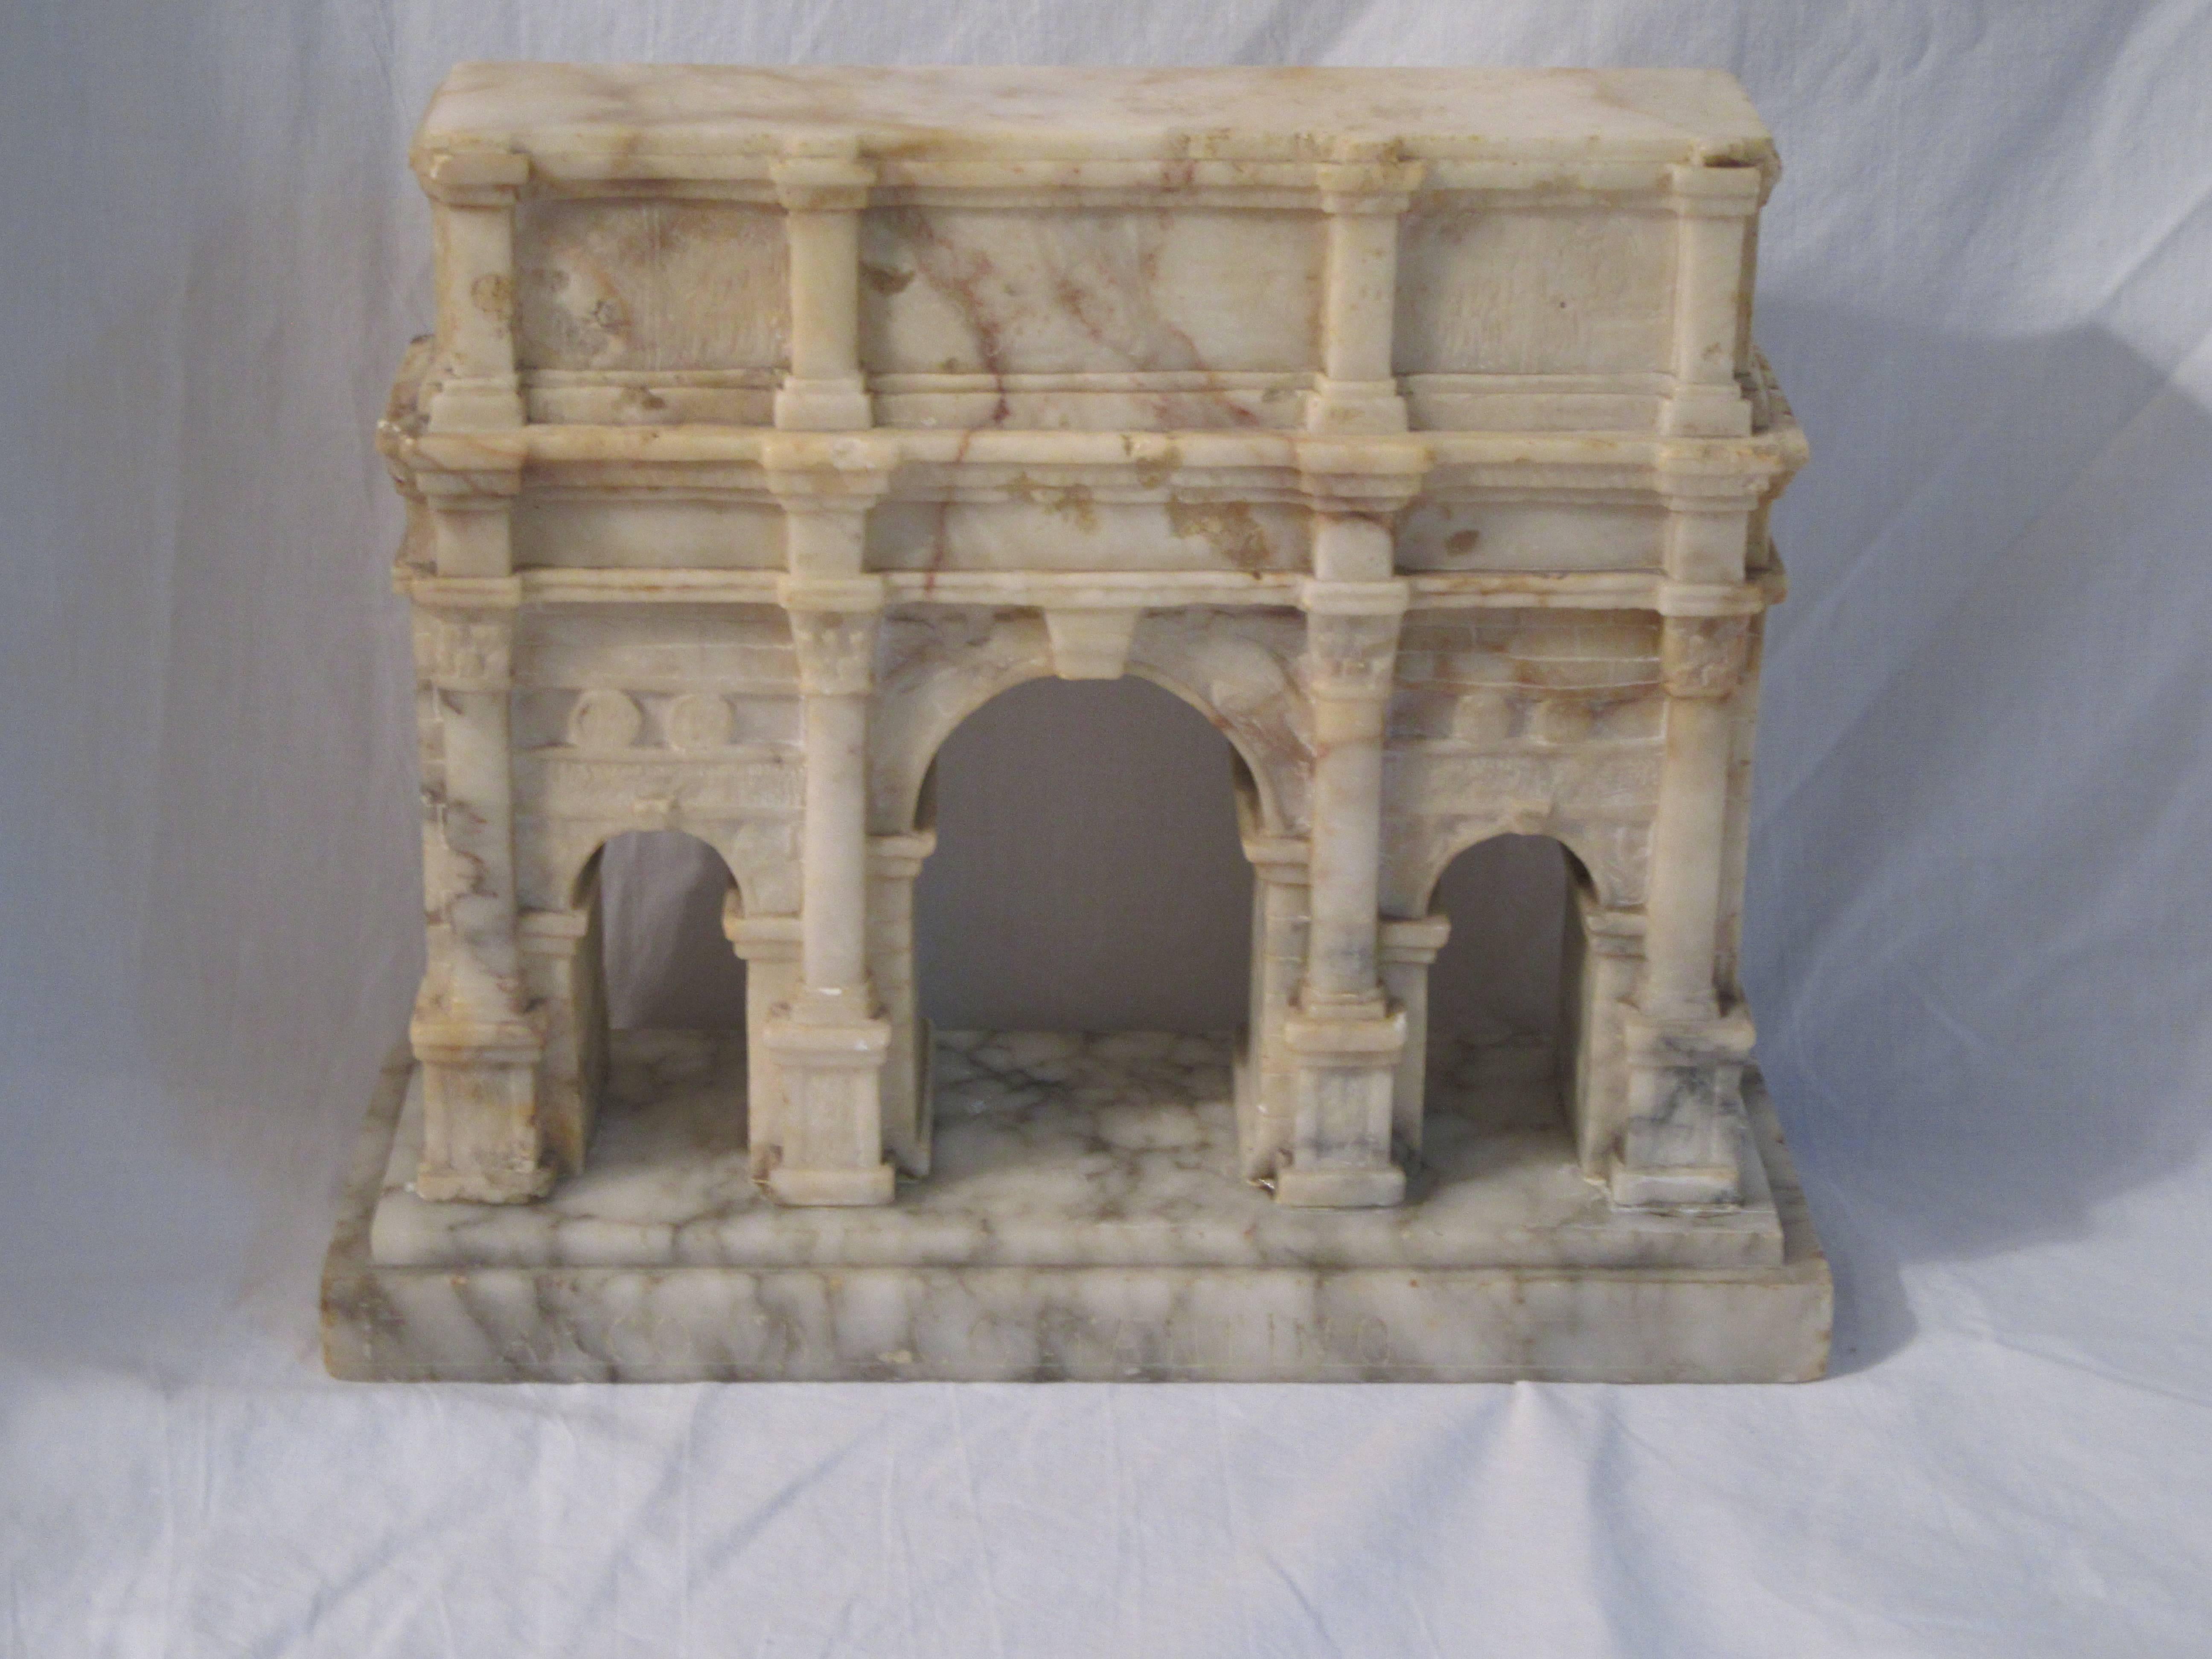 A very fine Grand Tour model the Arch of Constantine in carved alabaster. The model sits on a Carrara marble base which is marked "ARCO DI COSTANTINO".